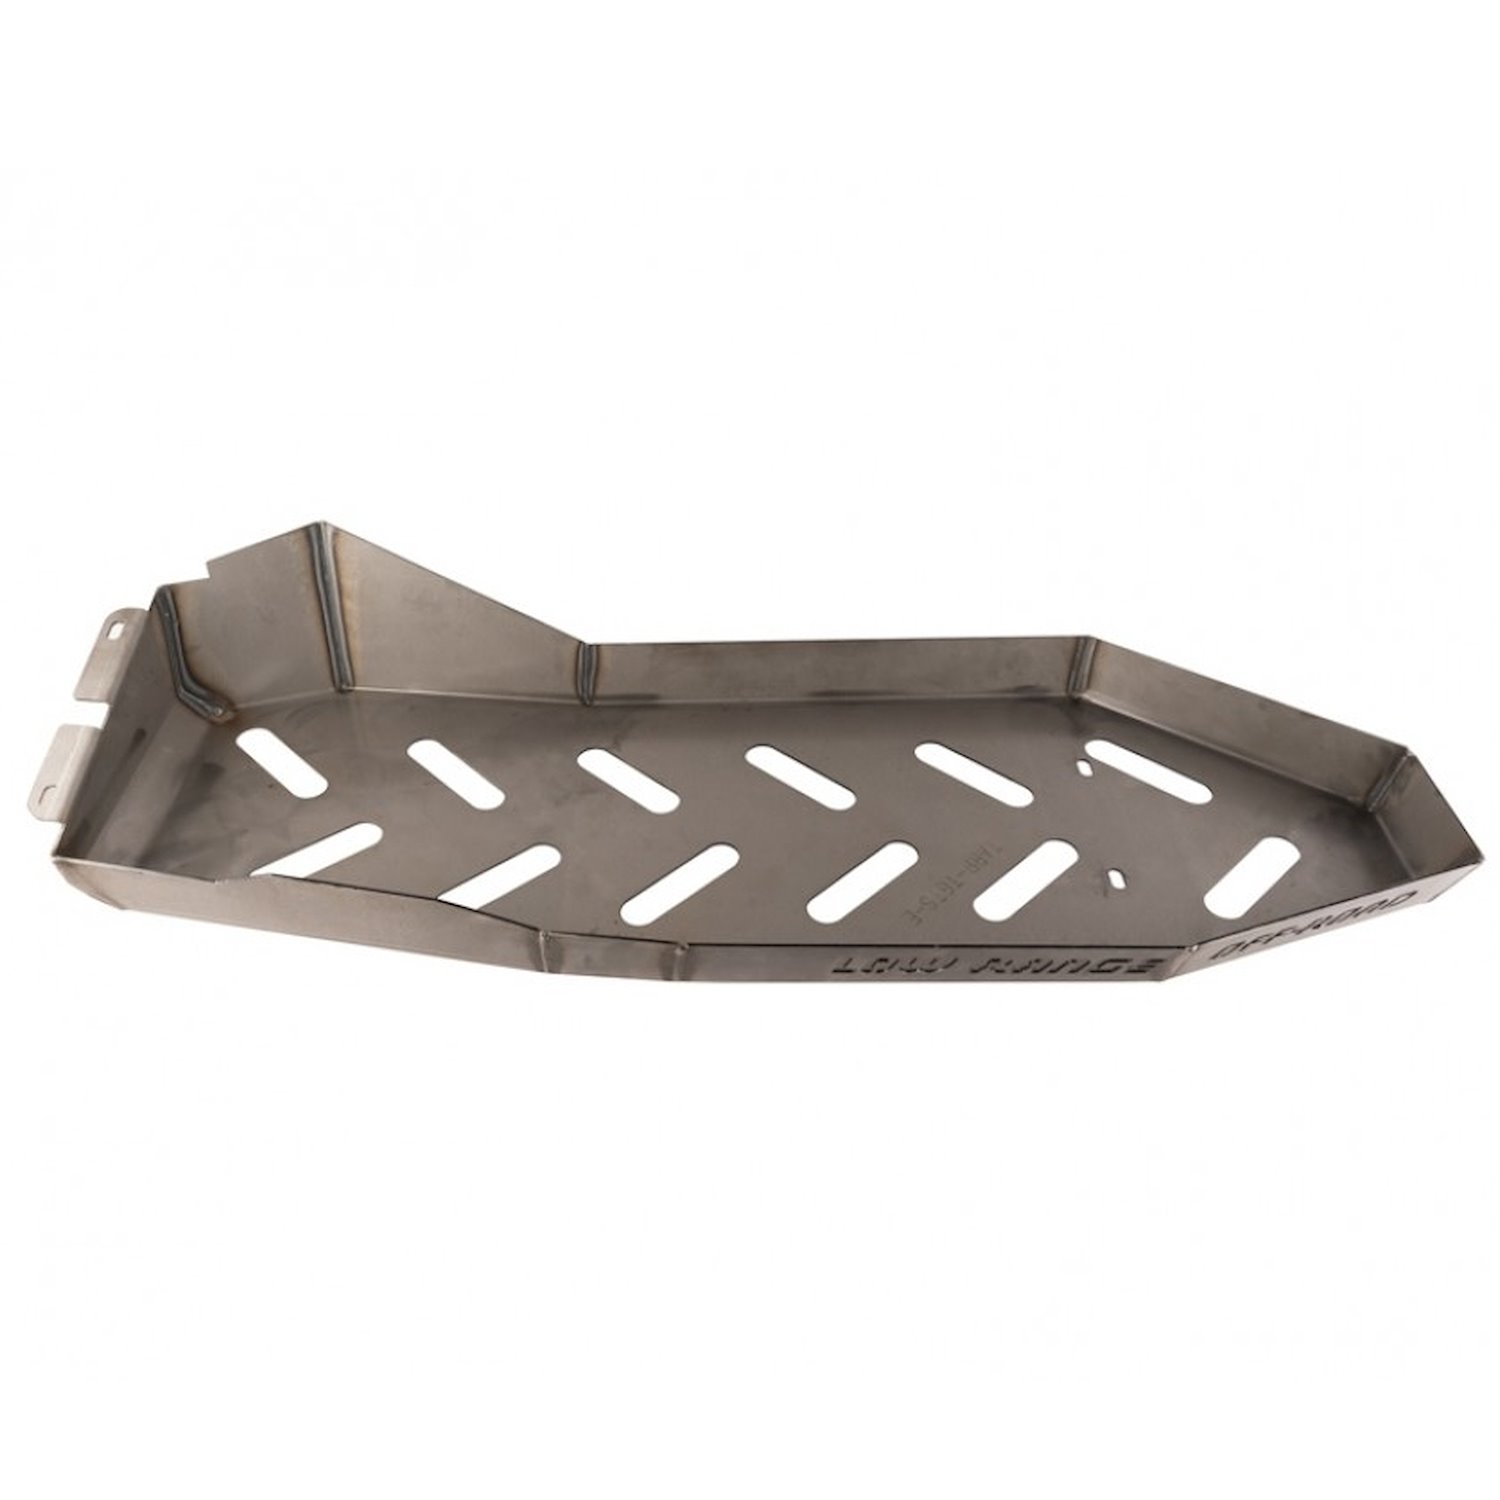 Gas Tank Skid Plate for 1995.5-2004 Toyota Tacoma